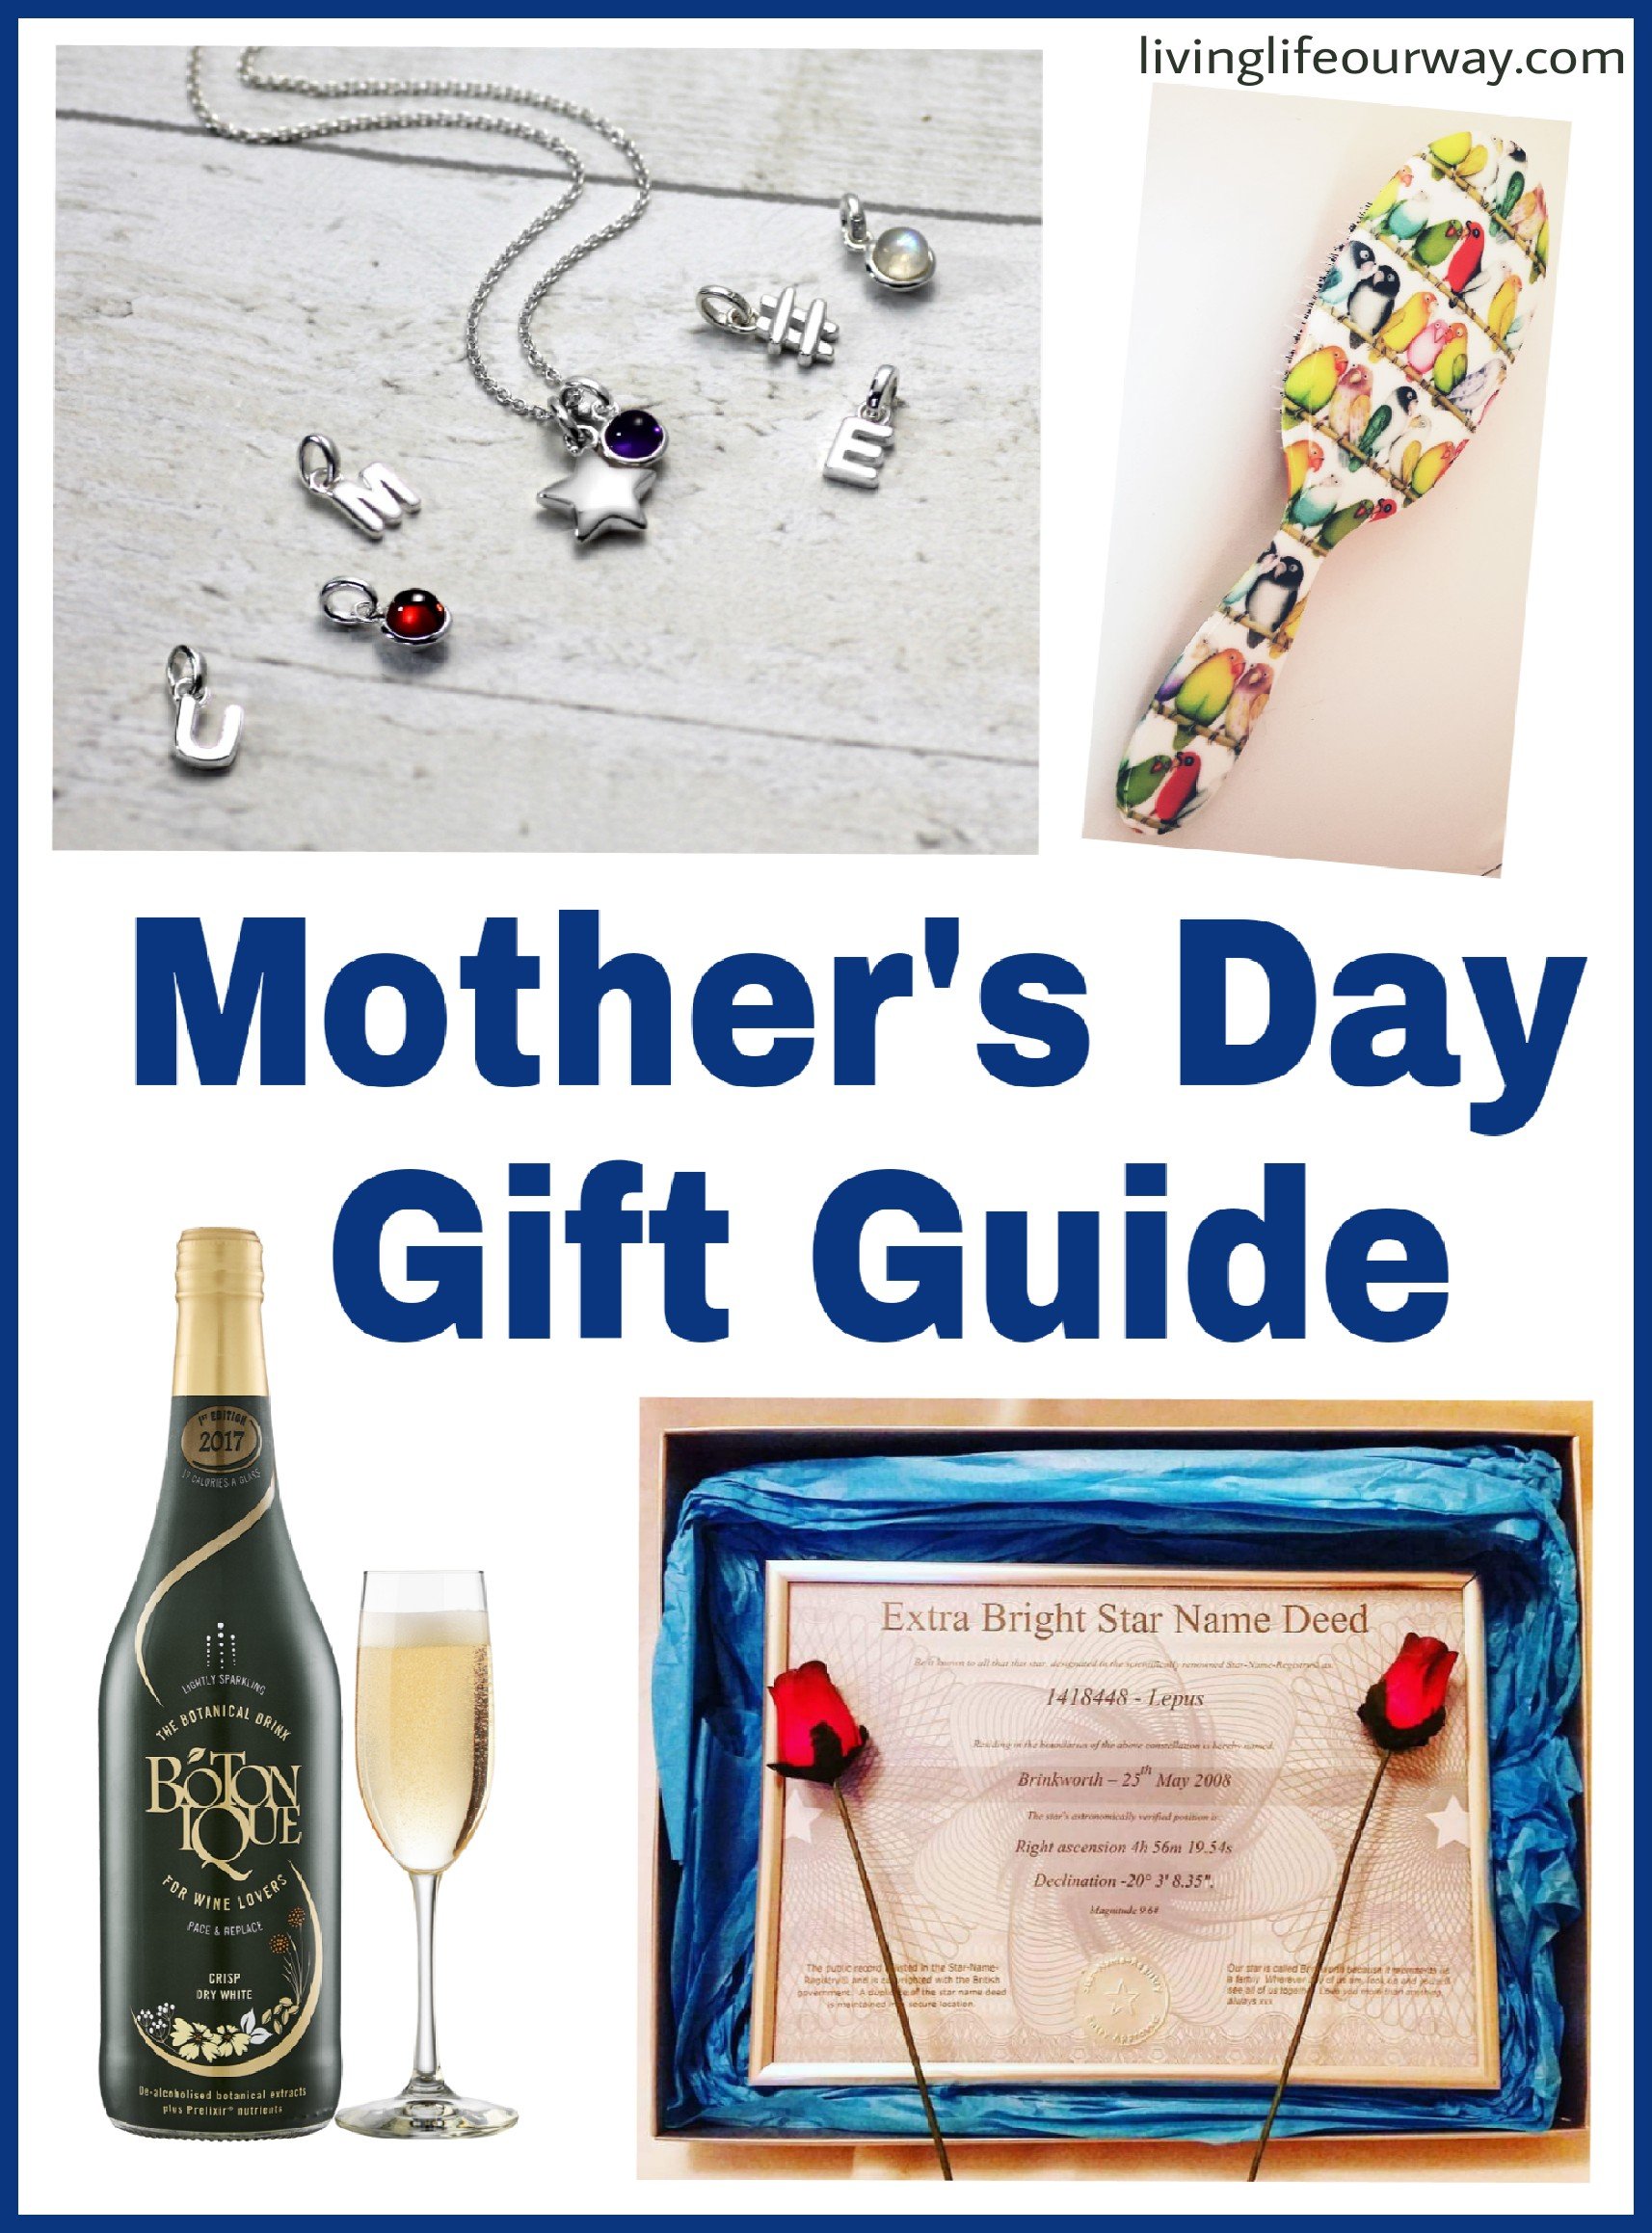 Mothers Day gift guide to title with image of botonique, rock and ruddle hairbrush, extra bright star gift set and hersey & son silver star pendant jewellery